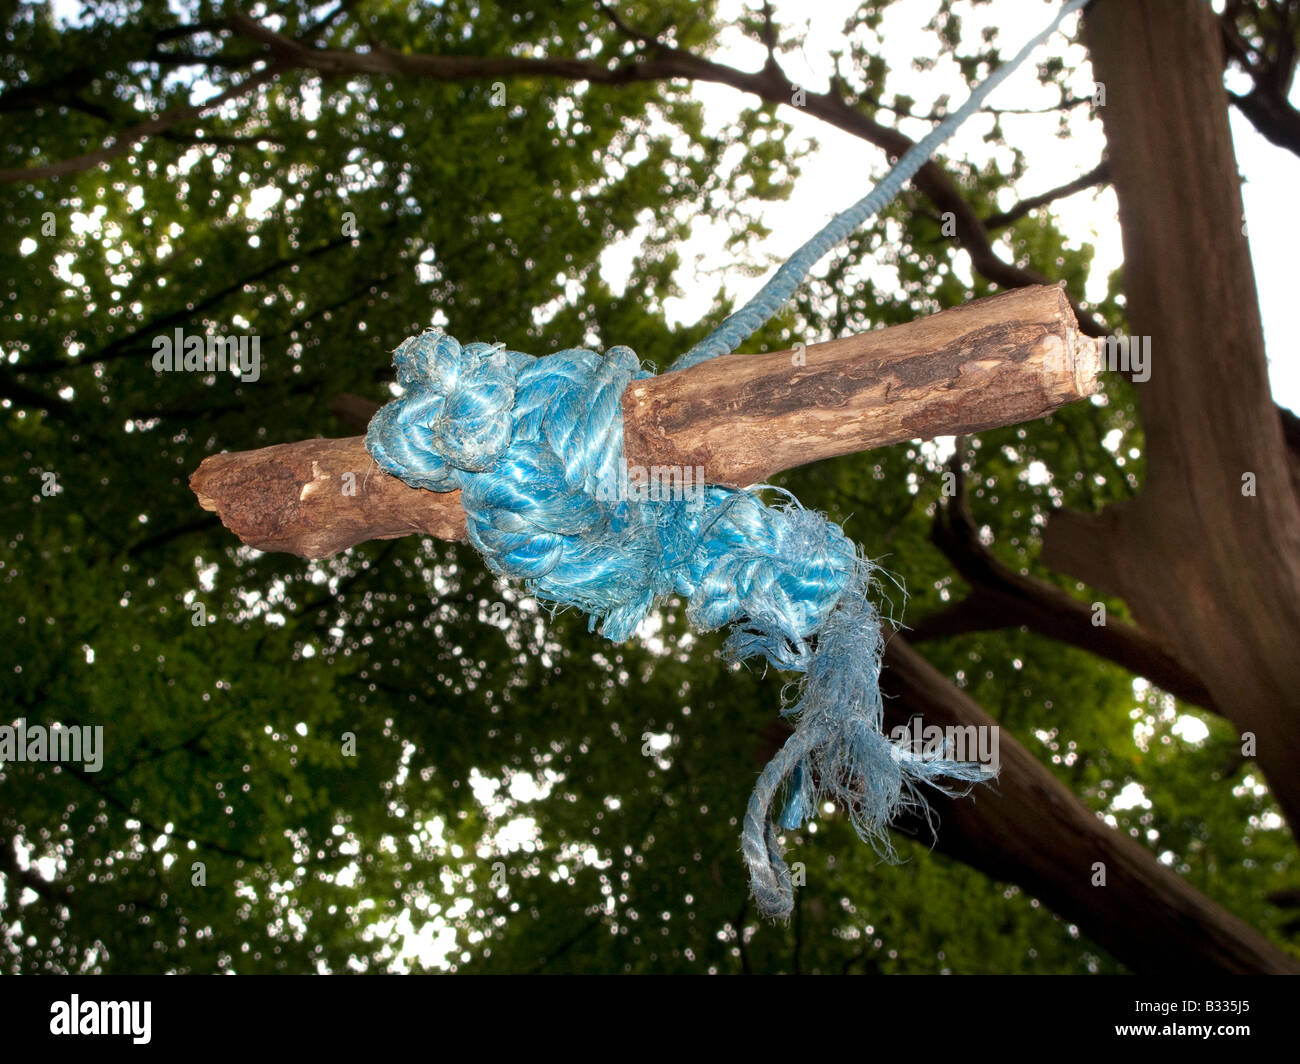 A rope swing hanging from a tree Stock Photo - Alamy